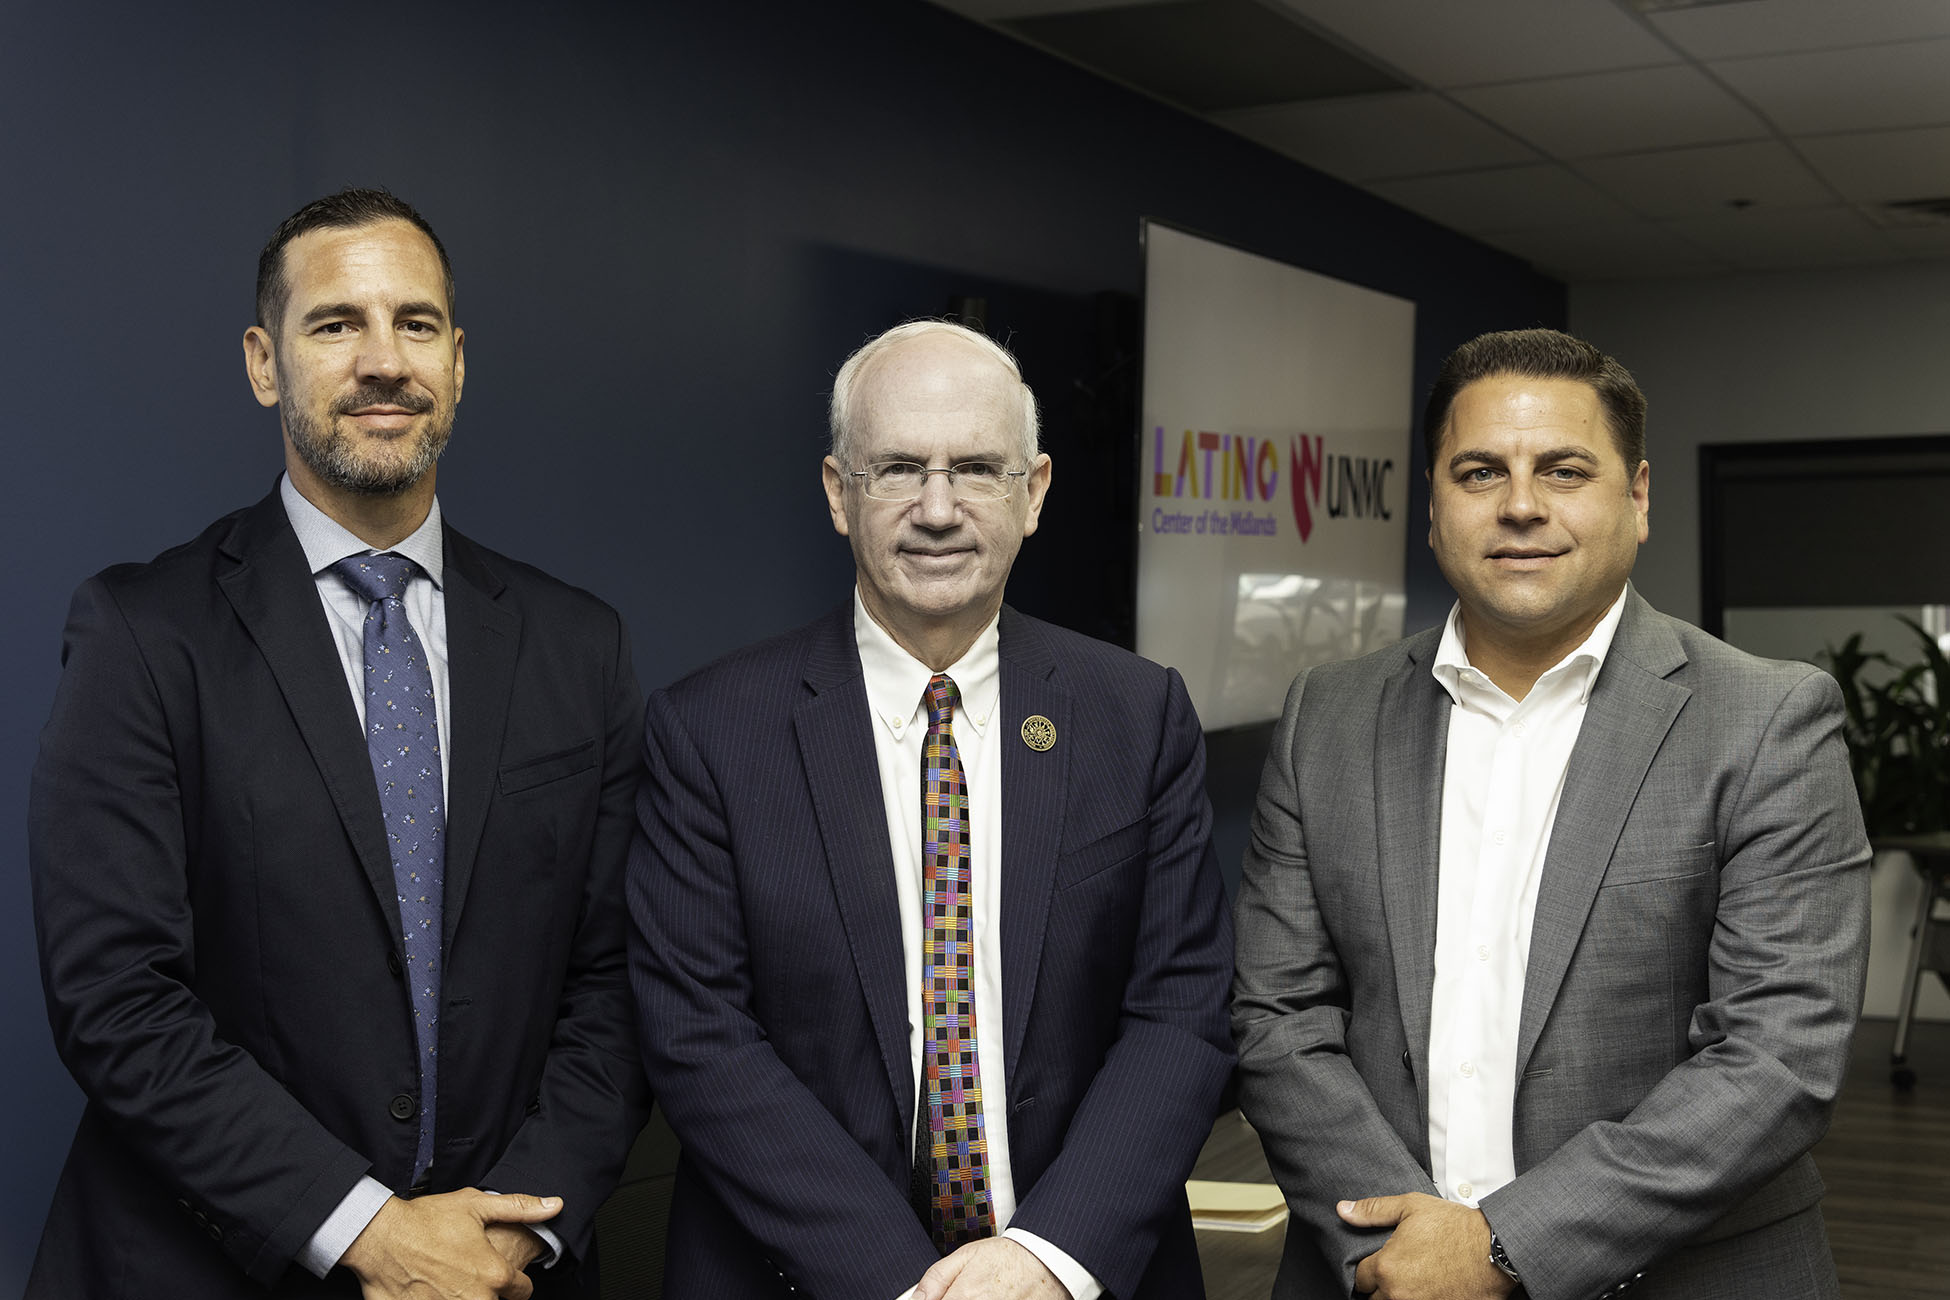 From left&comma; Albert Varas&comma; president and CEO of Latino Center of the Midlands&comma; UNMC Chancellor Jeffrey P&period; Gold&comma; MD&comma; and Emiliano Lerda&comma; co-founder of co-warehousing and community space Elevator&period; Varas is a UNMC board of counselor member&comma; and Lerda is board chair&period;